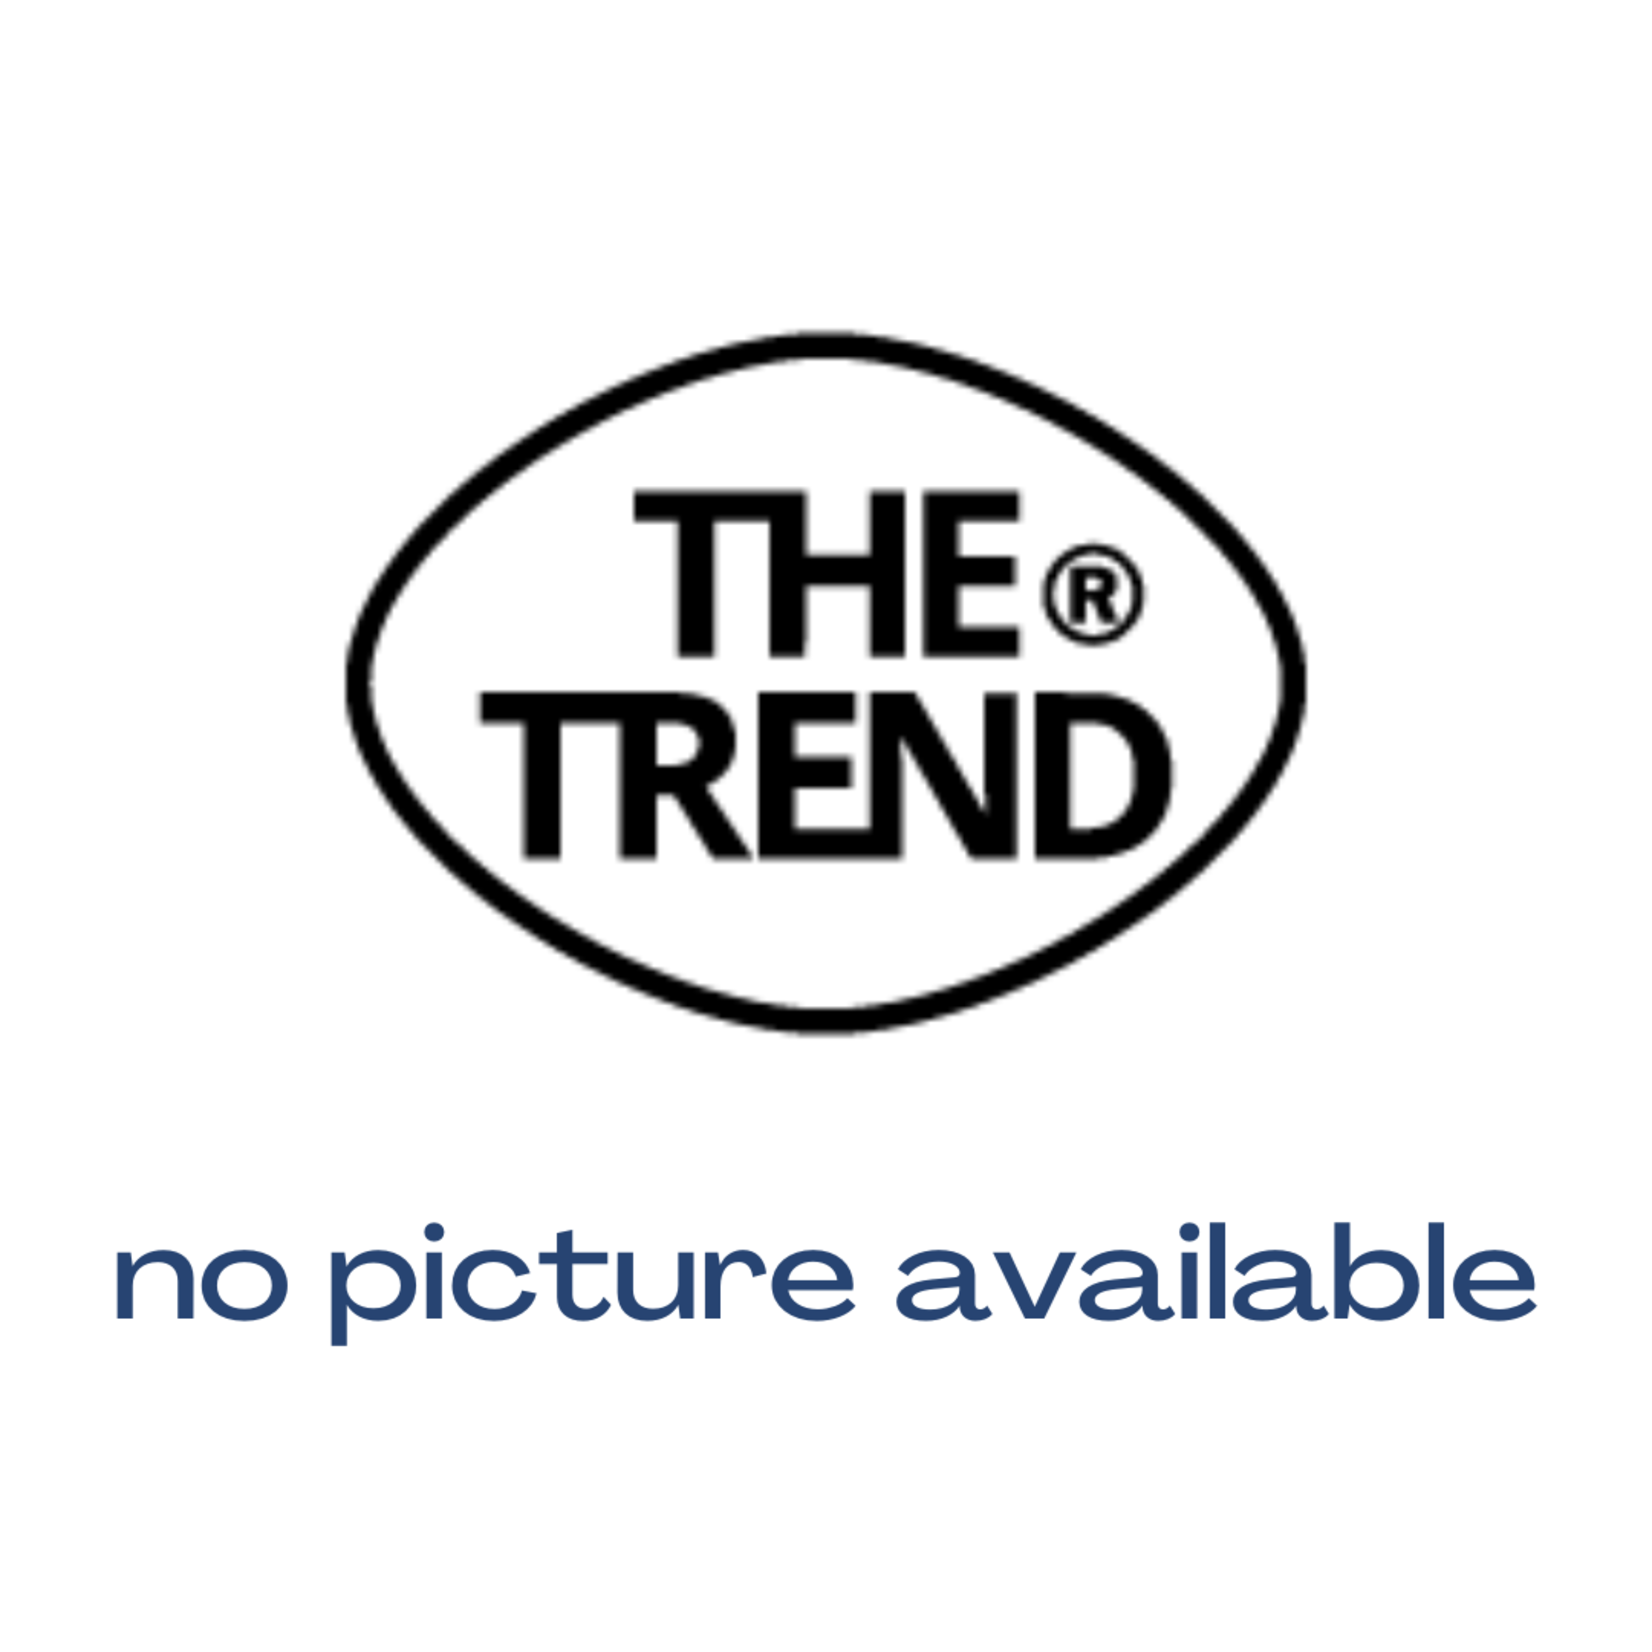 The Trend the Trend 22313